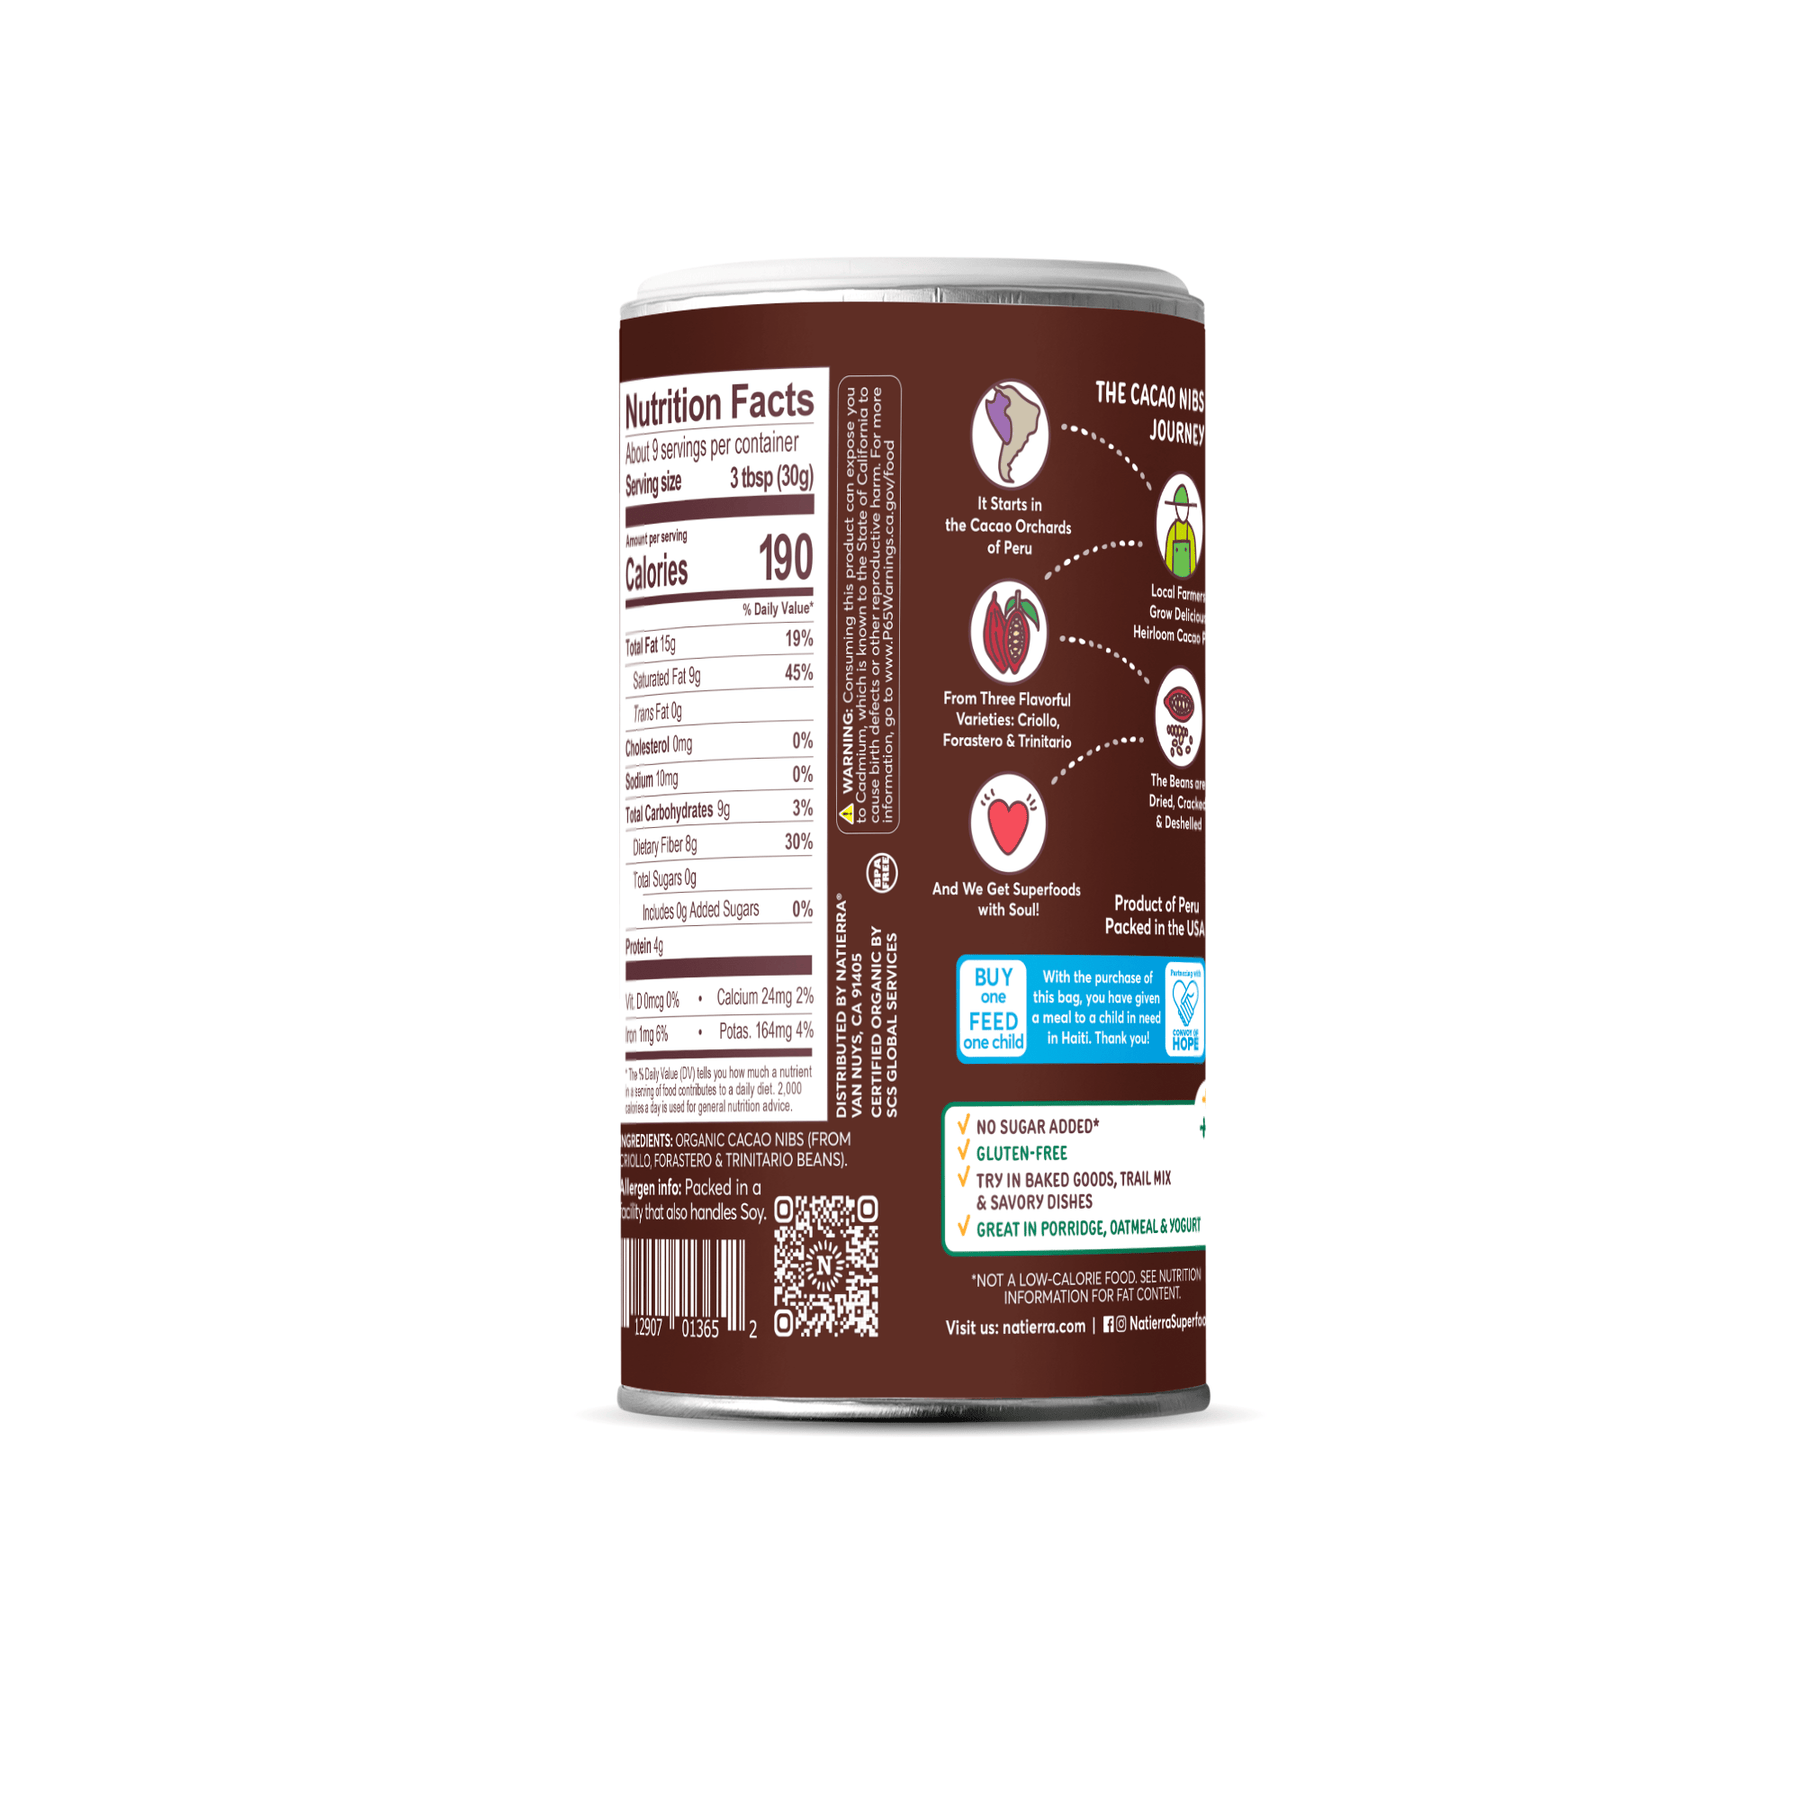 Natierra Organic Cacao Nibs shaker with nutrition facts and main product claims